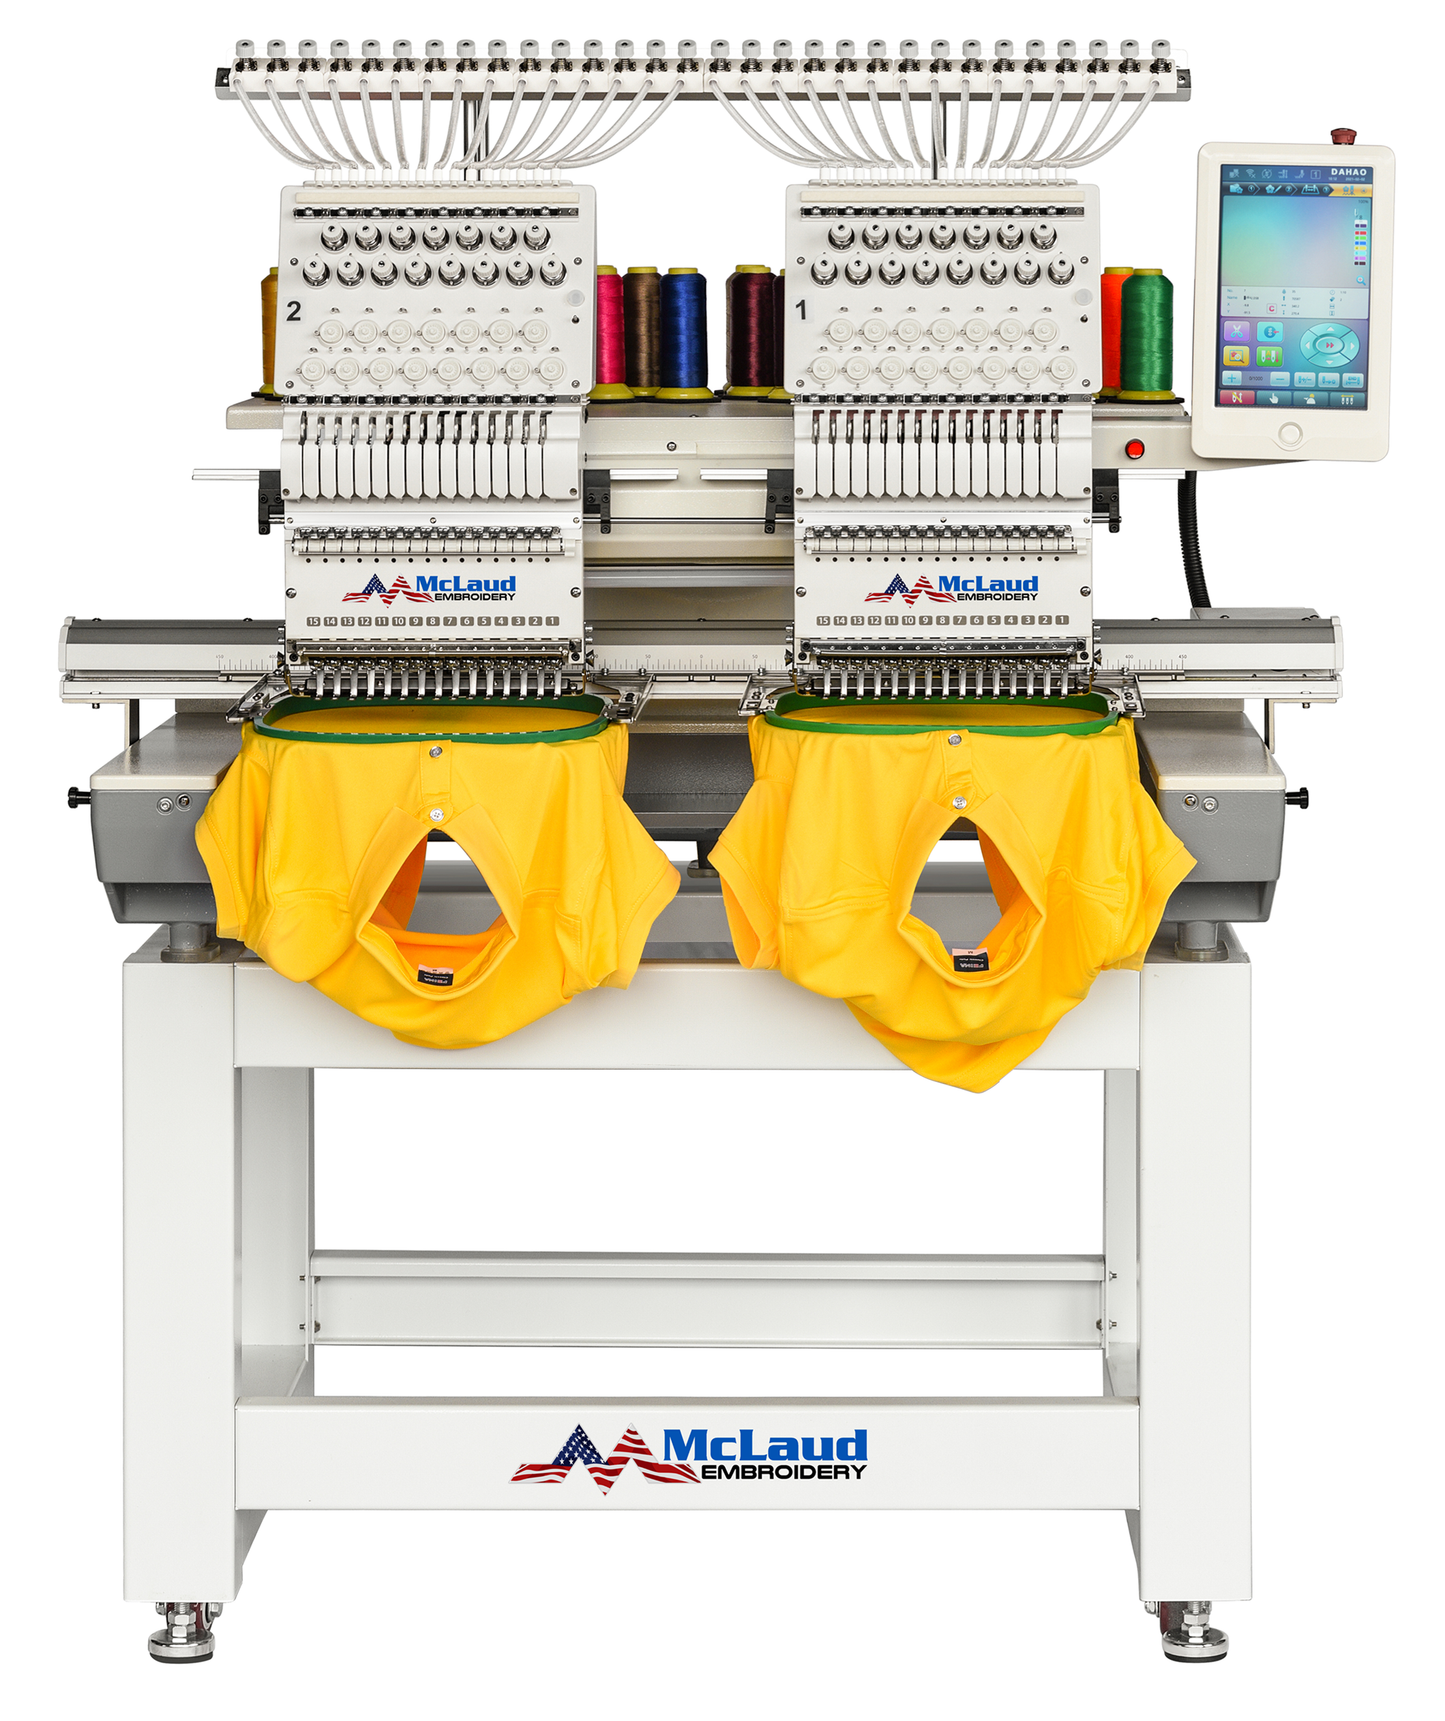 McLaud MD215-16x18 Embroidery Machine, 2 Head, 15 needles, 1200 spm, Free Shipping in USA